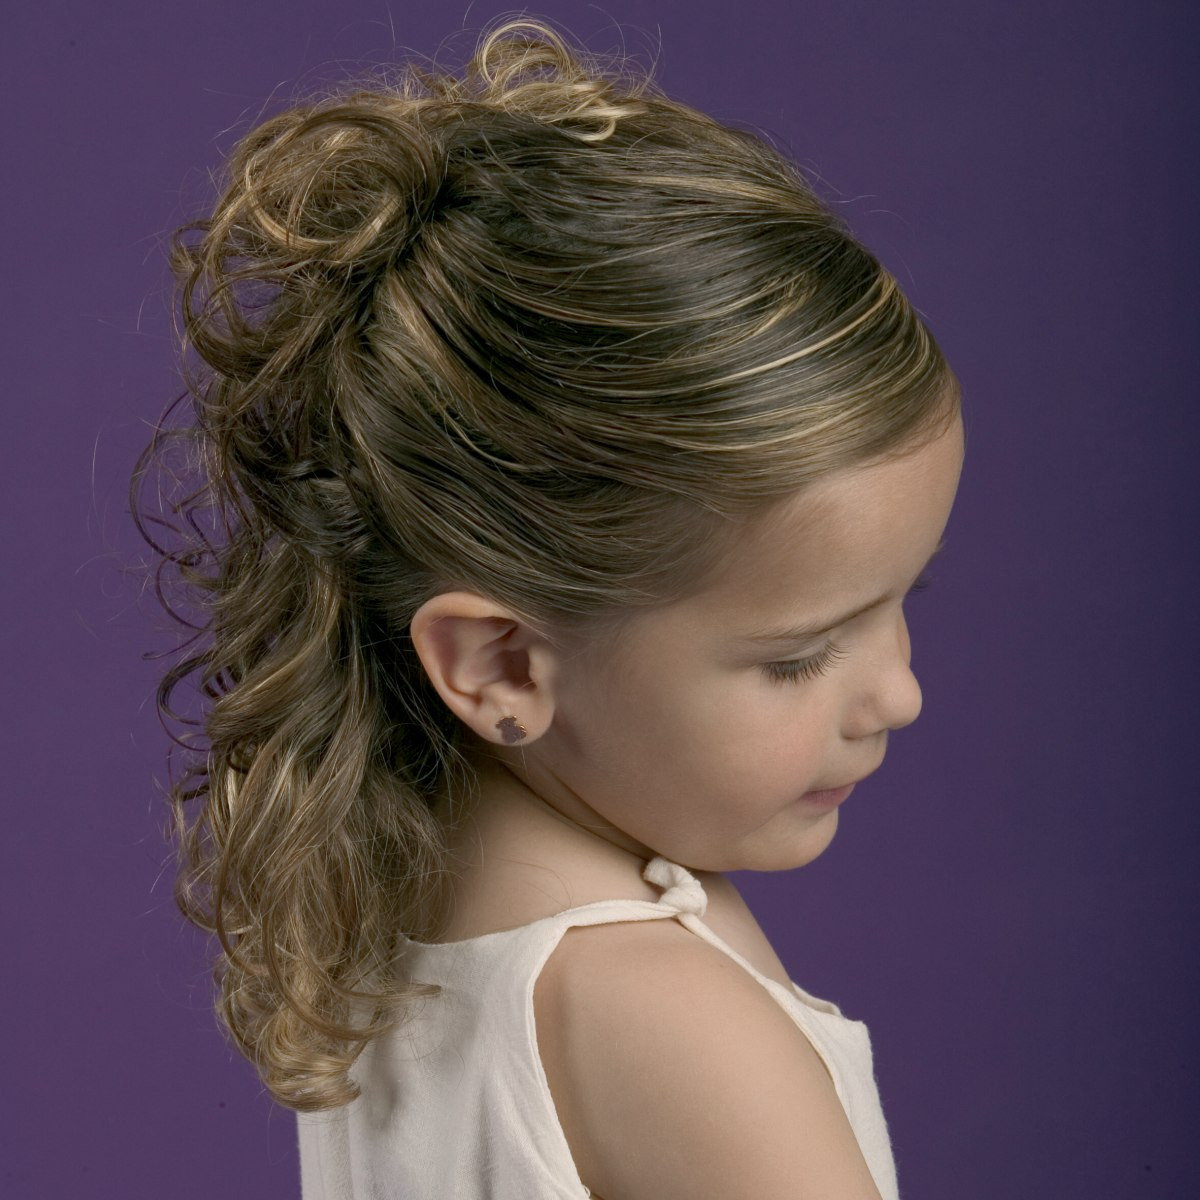 Updo Hairstyle For Little Girls
 Simple partial up style for little girls with natural curl